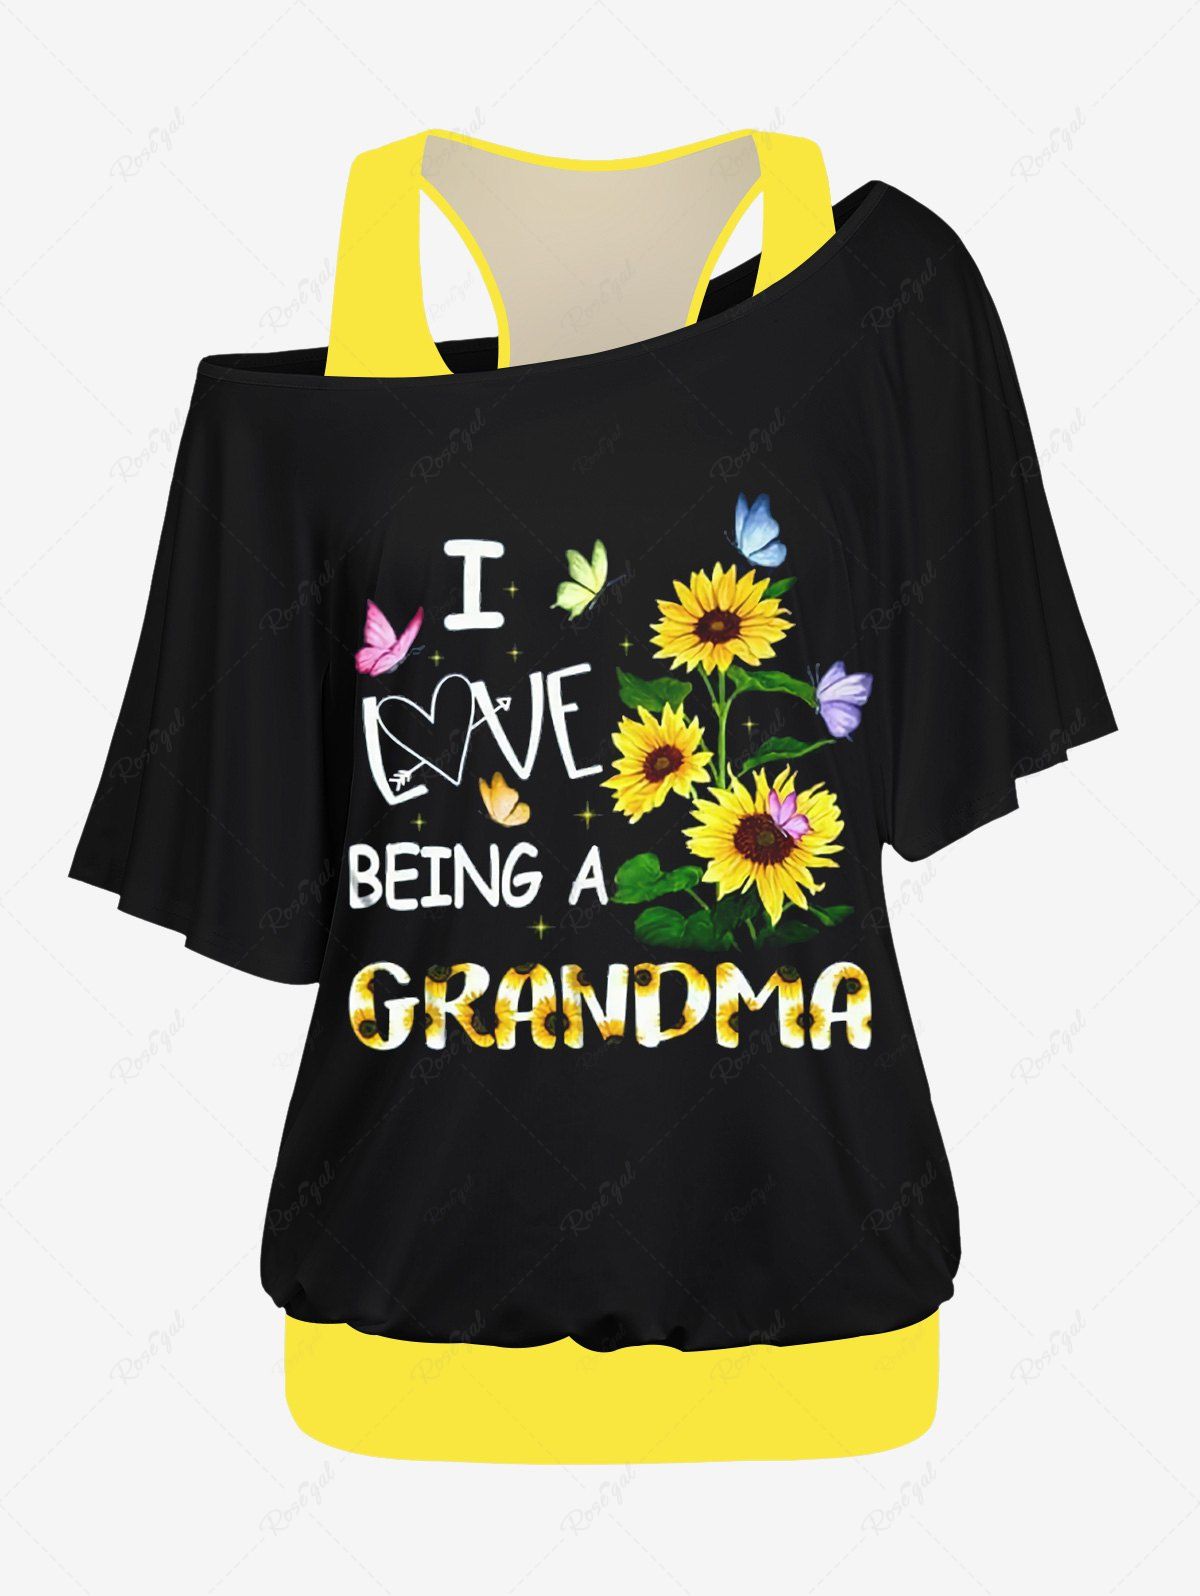 Fashion Plus Size Solid Racerback Tank Top and Sunflower Butterfly Letter Print Skew Neck Batwing Sleeves T-shirt Set  